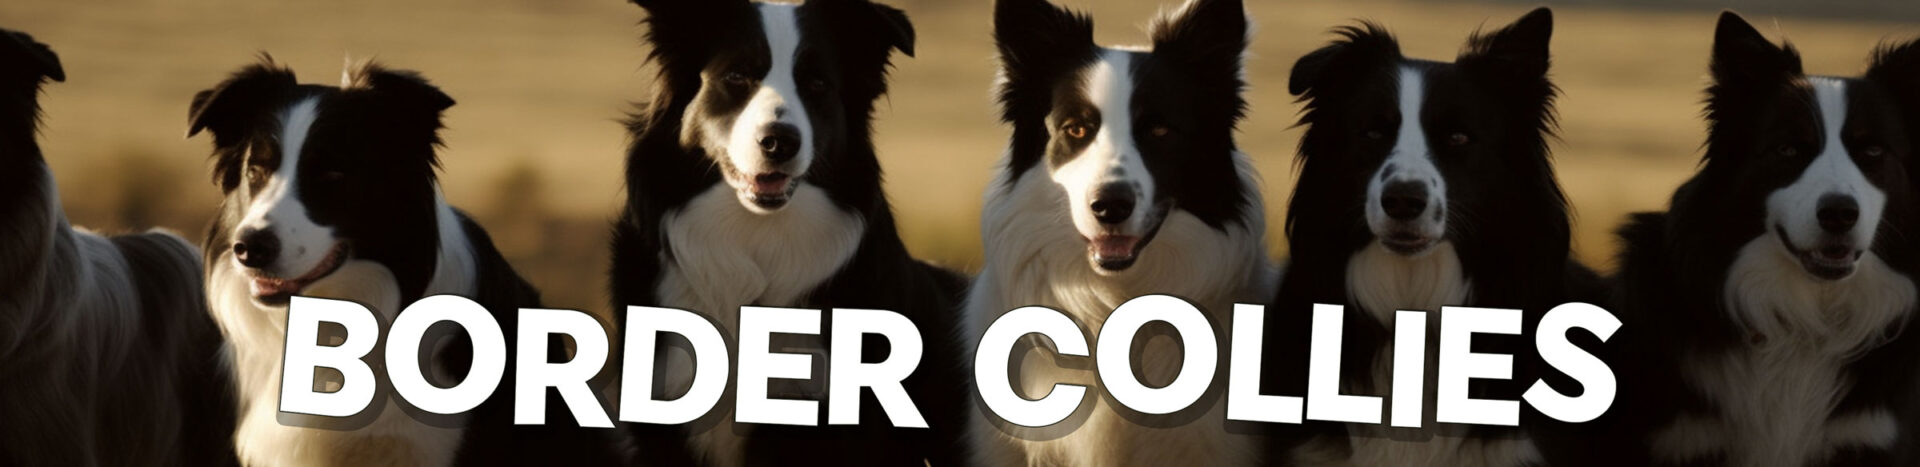 Border Collie Gifts